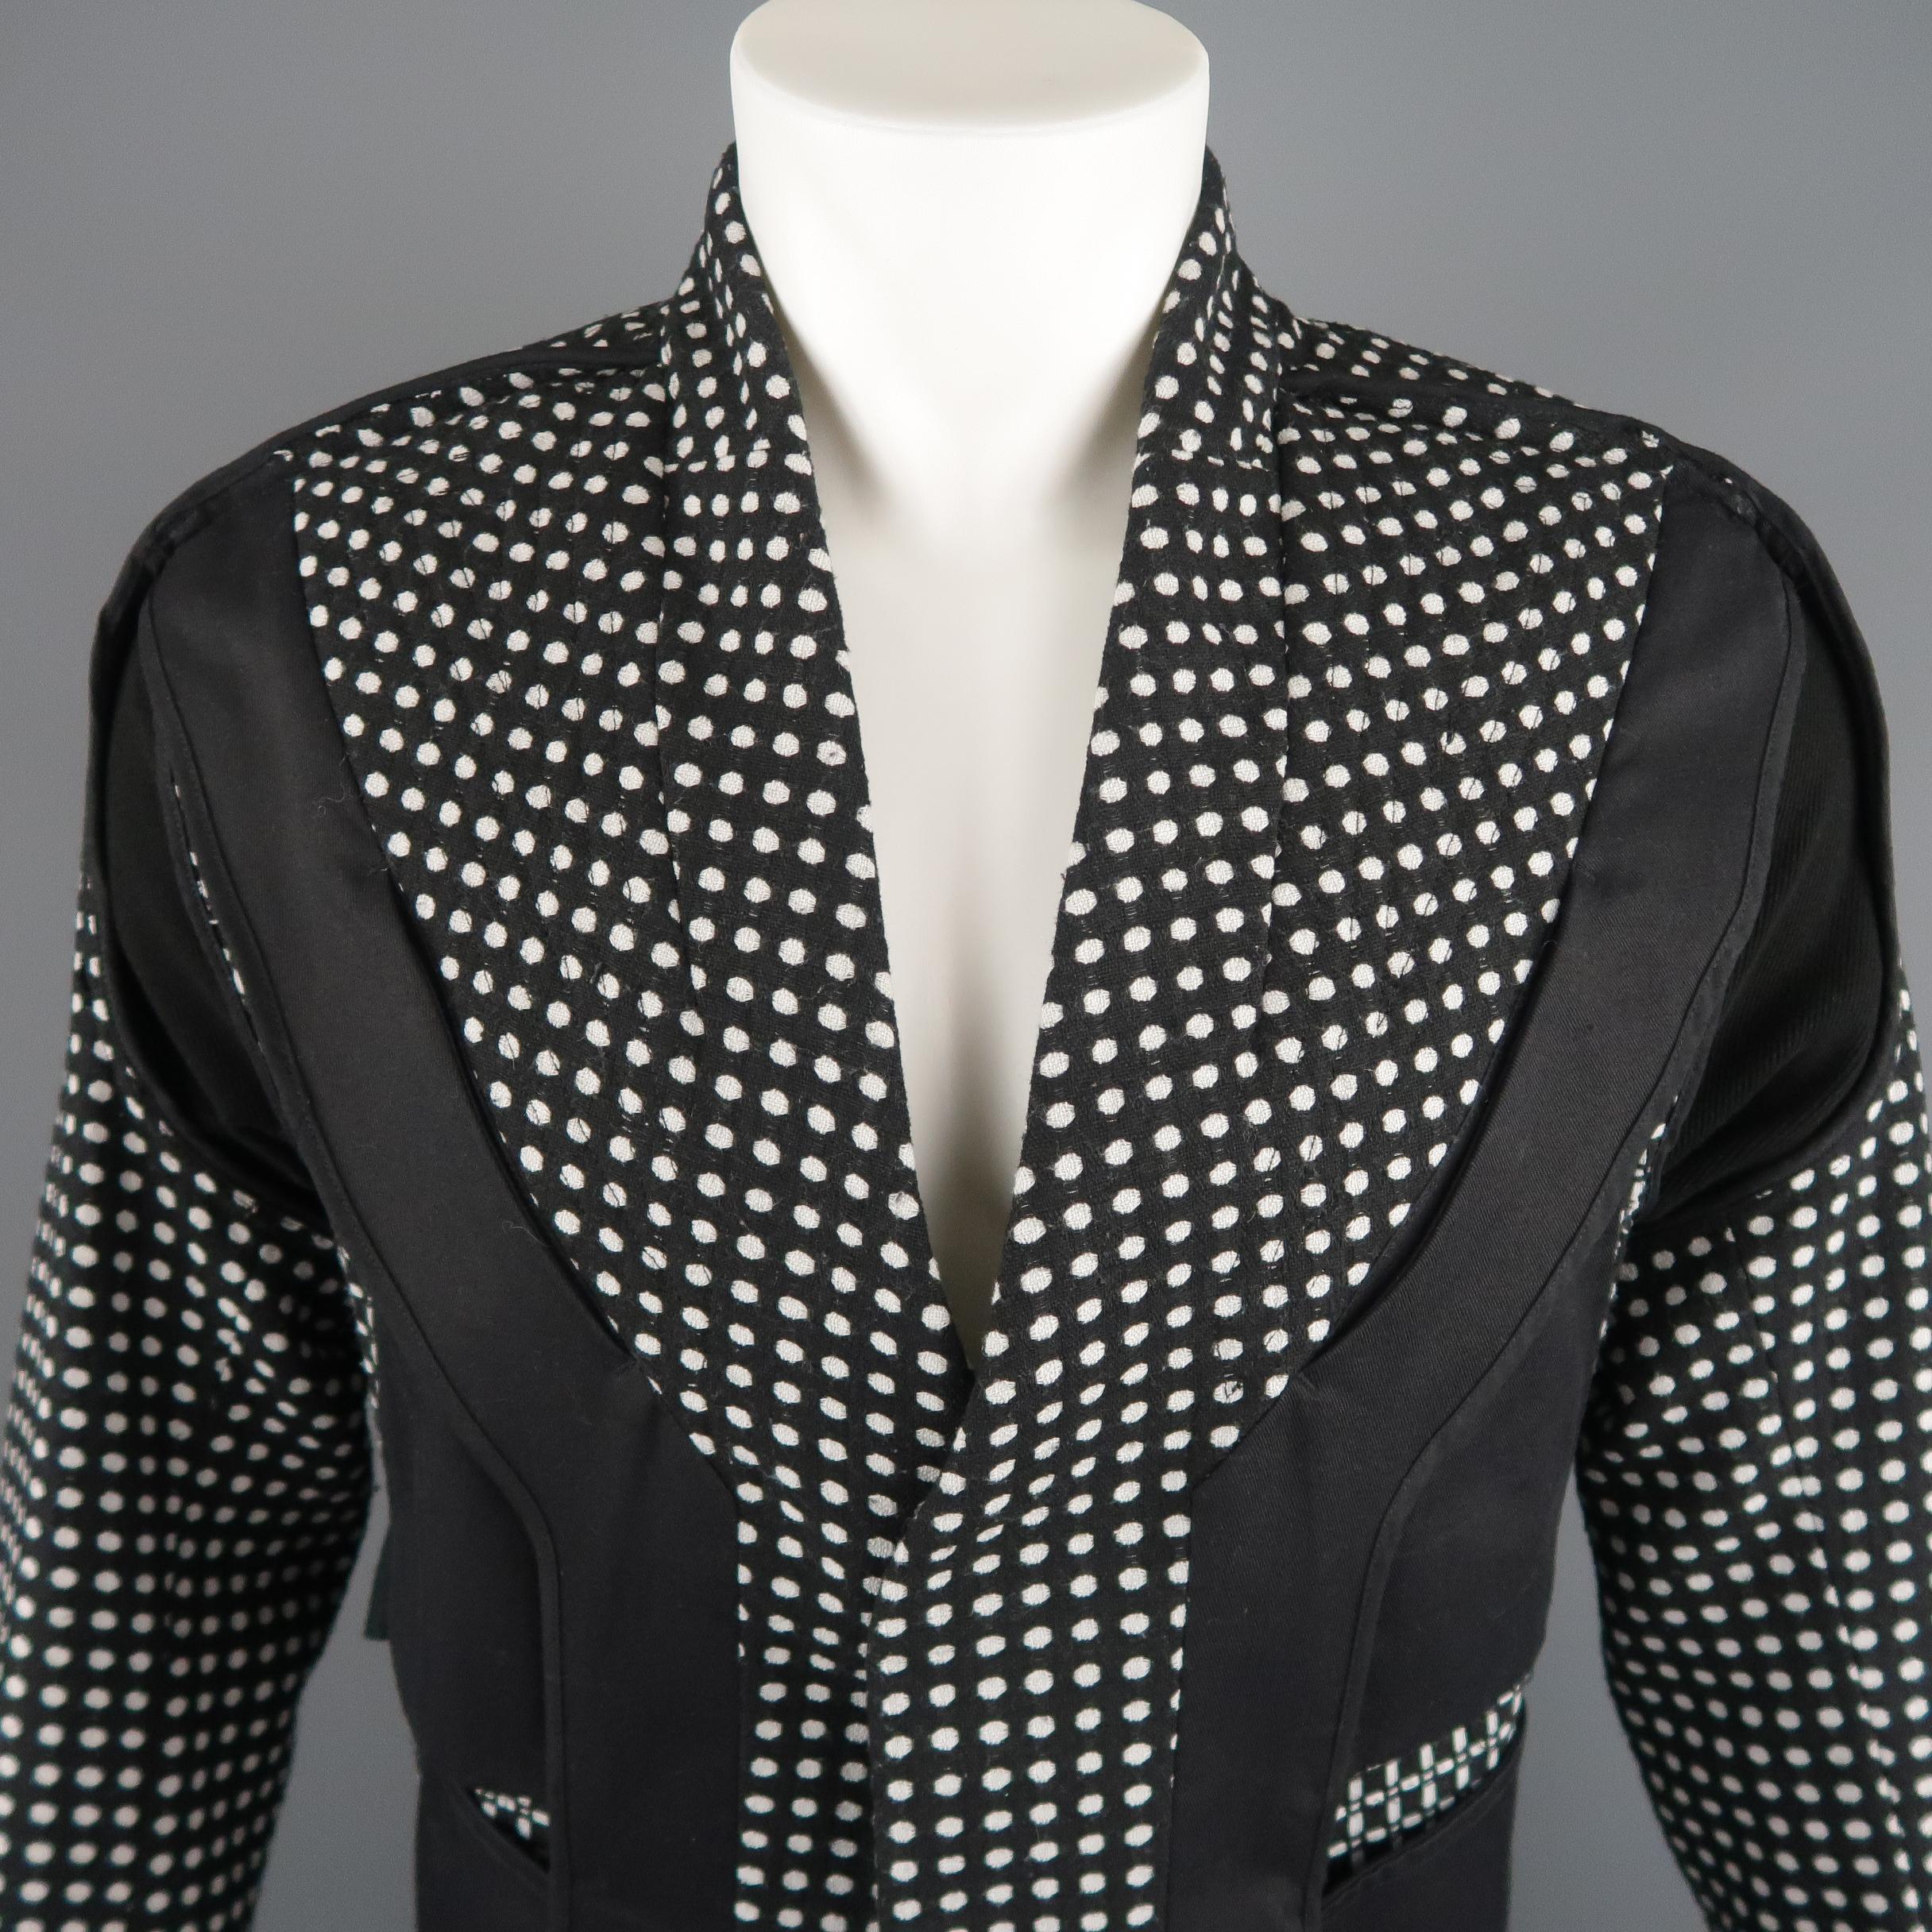 ABASI ROSBOROUGH Dissident Autumn Winter 17 Deconstructed Jacket comes in black and white tones in a solid and polka dots wool materials, collarless, with a magnet closure, pockets at front, back belt, unlined. Made in USA.
 
Excellent Pre-Owned